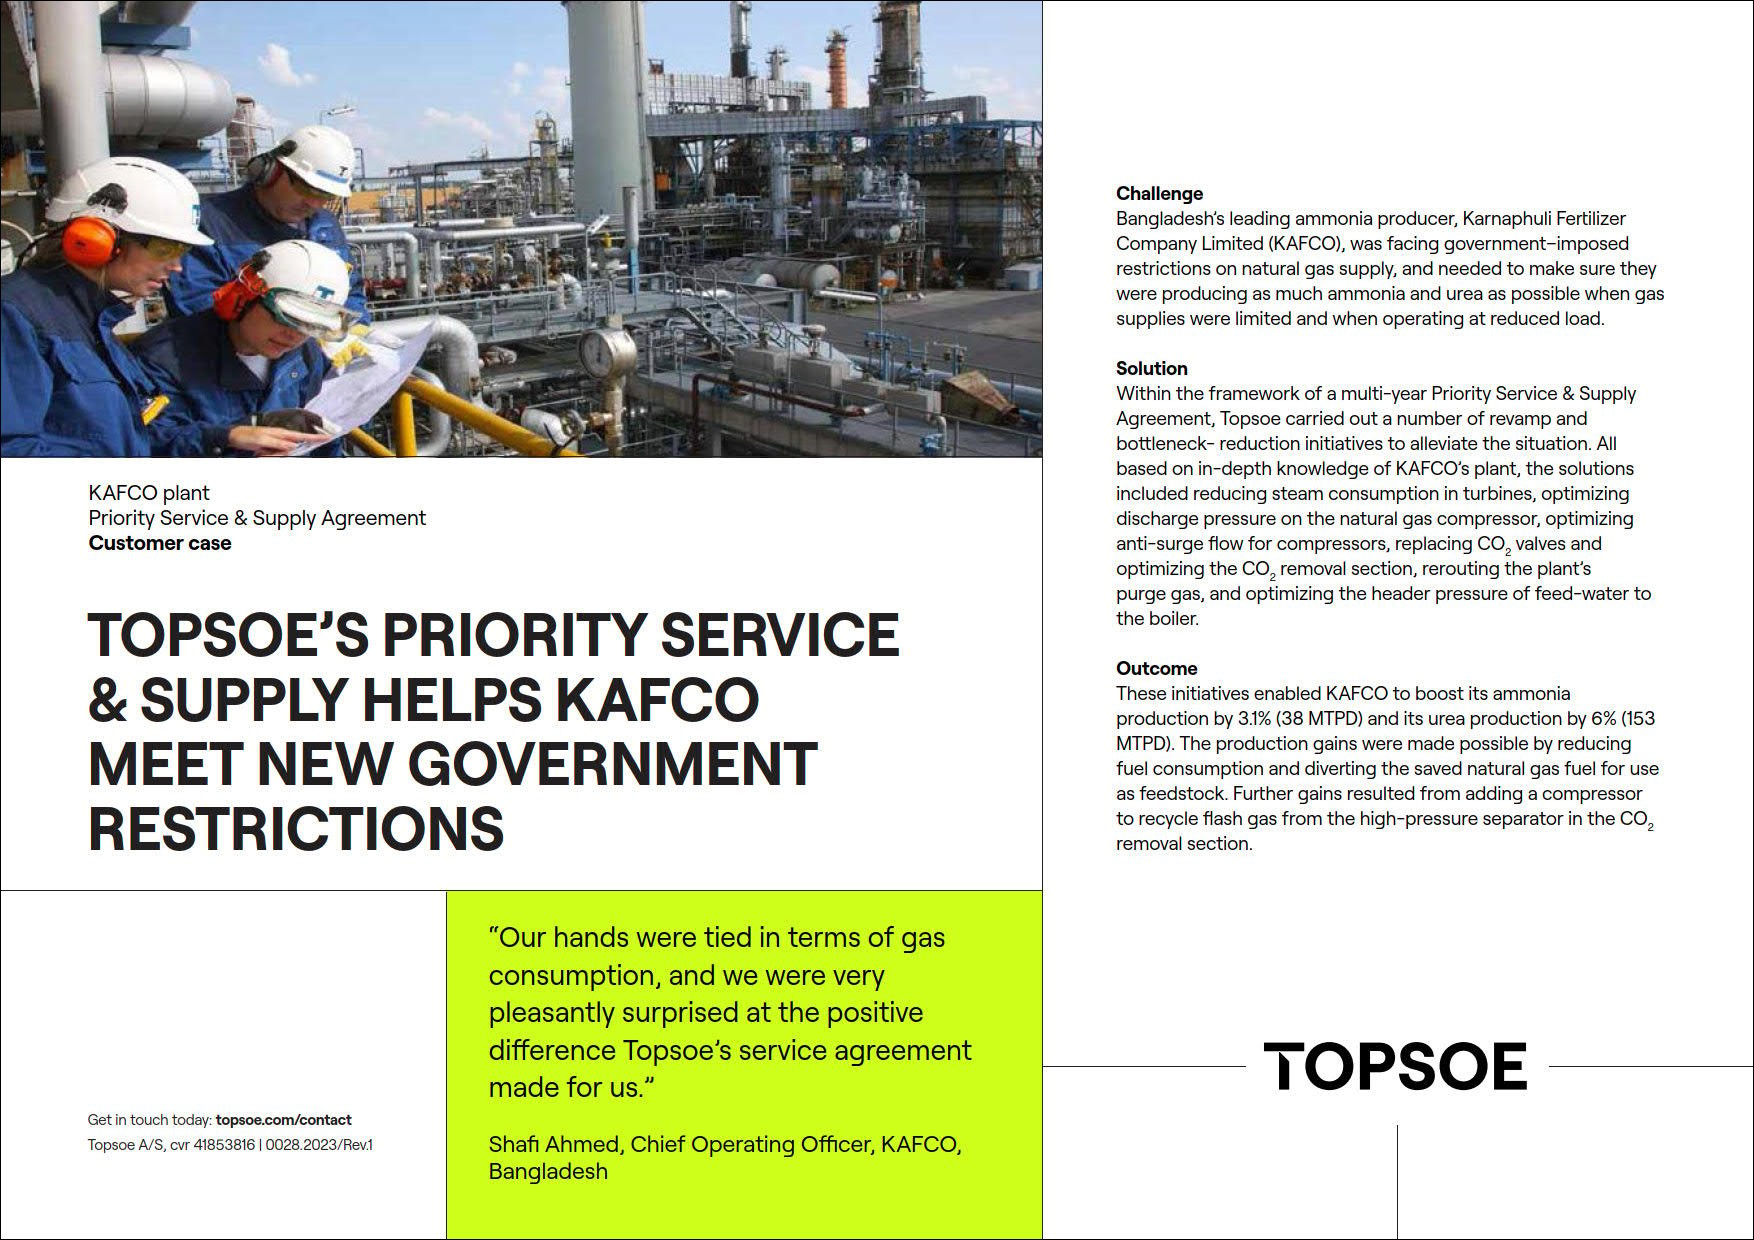 Topsoe's priority service & supply helps KAFCO meet new government restrictions